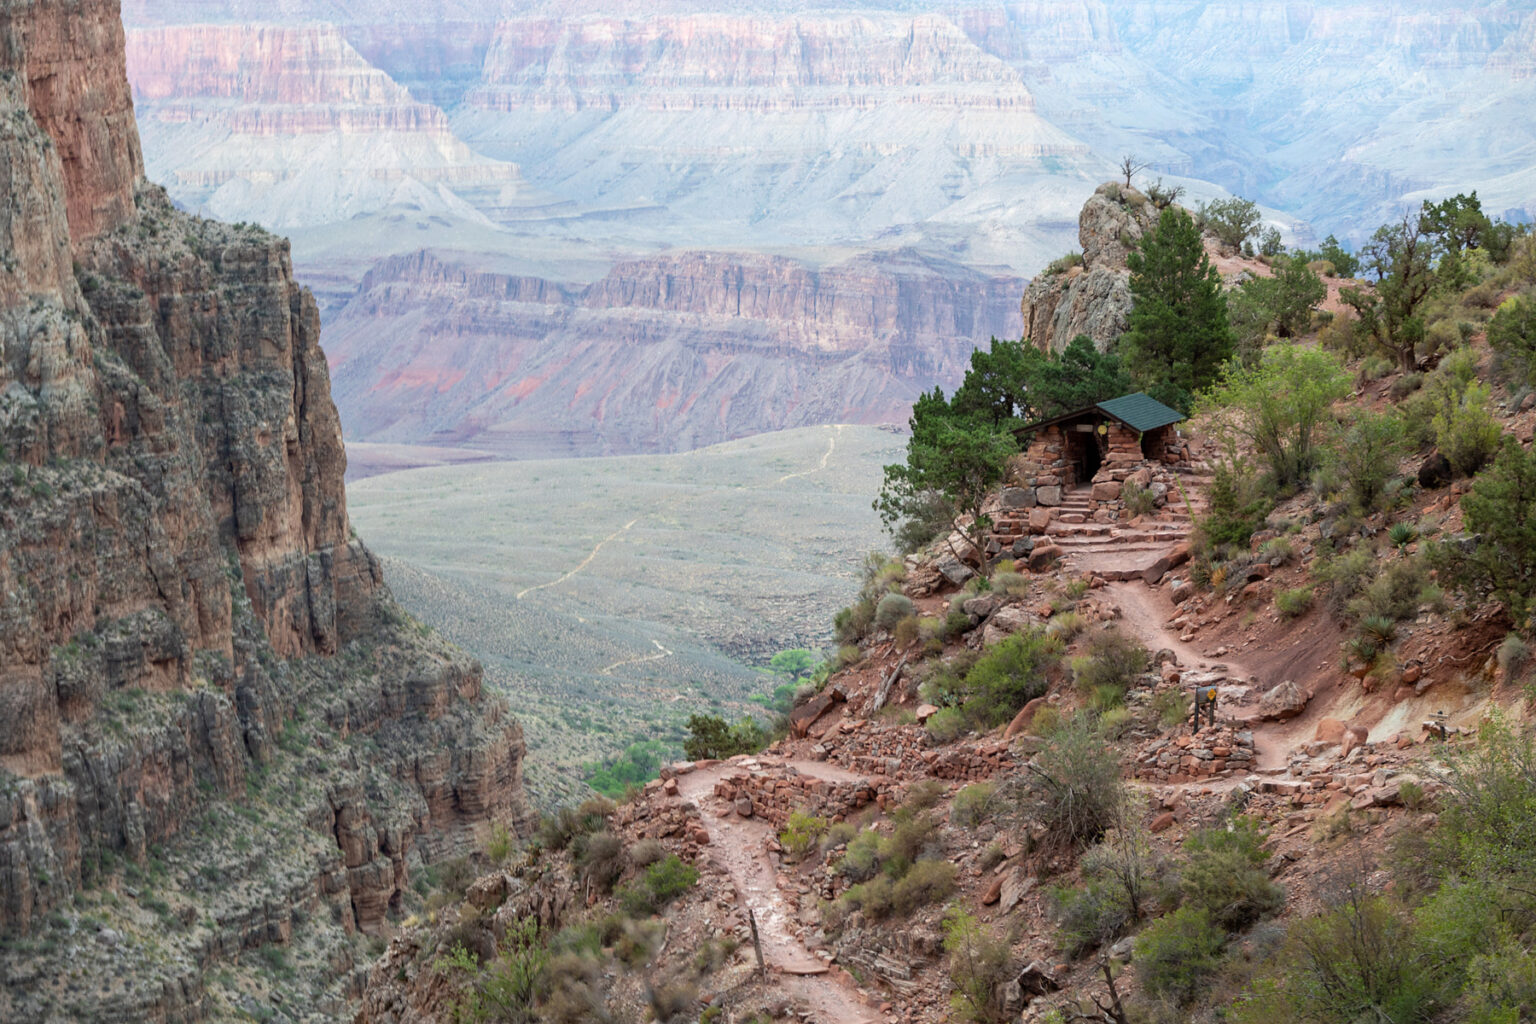 View of rest hut on Bright Angel Trail in Grand Canyon National Park